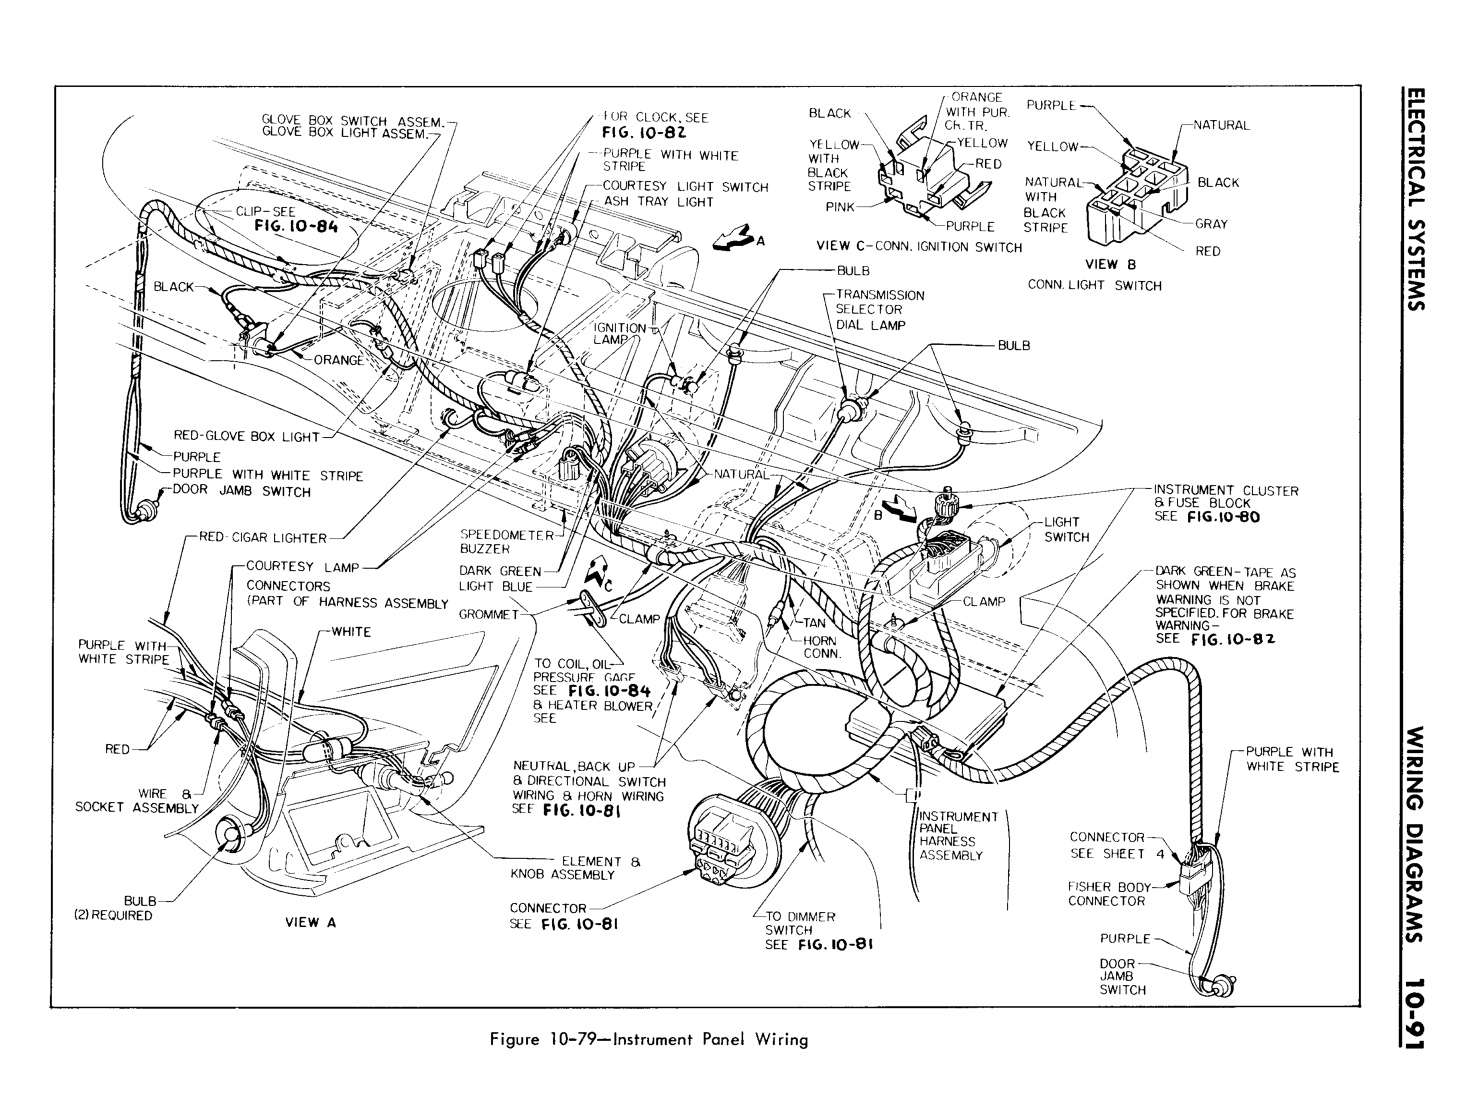 n_10 1961 Buick Shop Manual - Electrical Systems-091-091.jpg